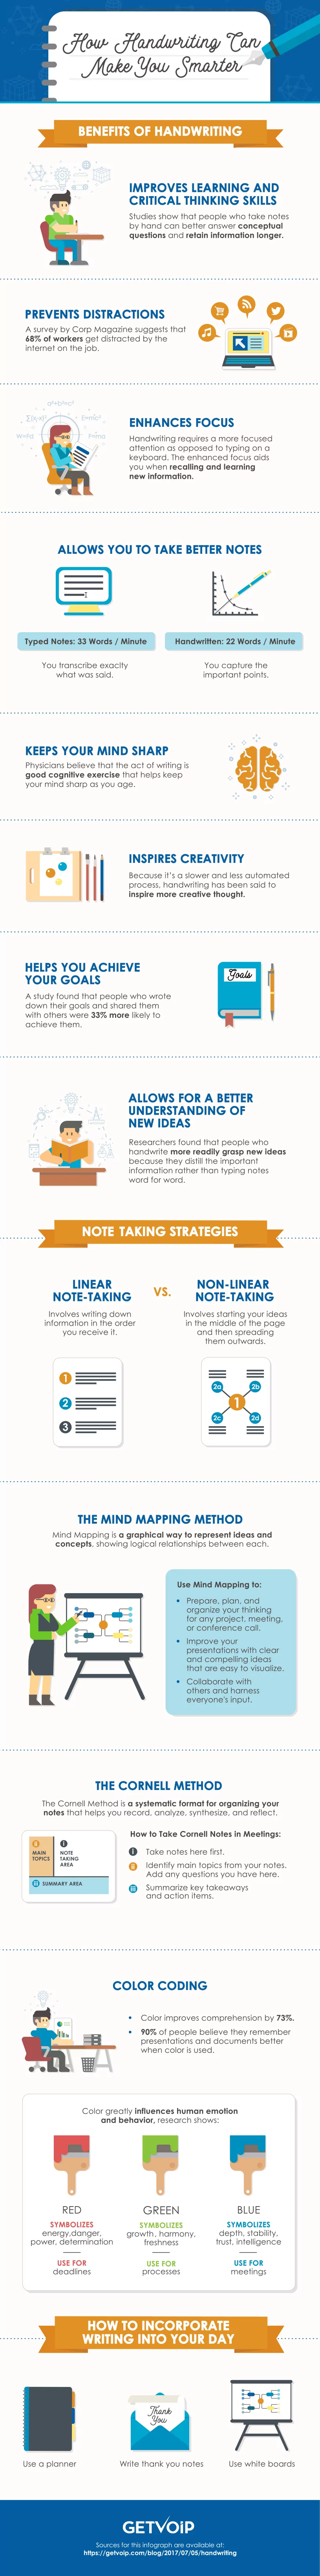 An Interesting Infographic on How Handwriting Can Make You Smarter